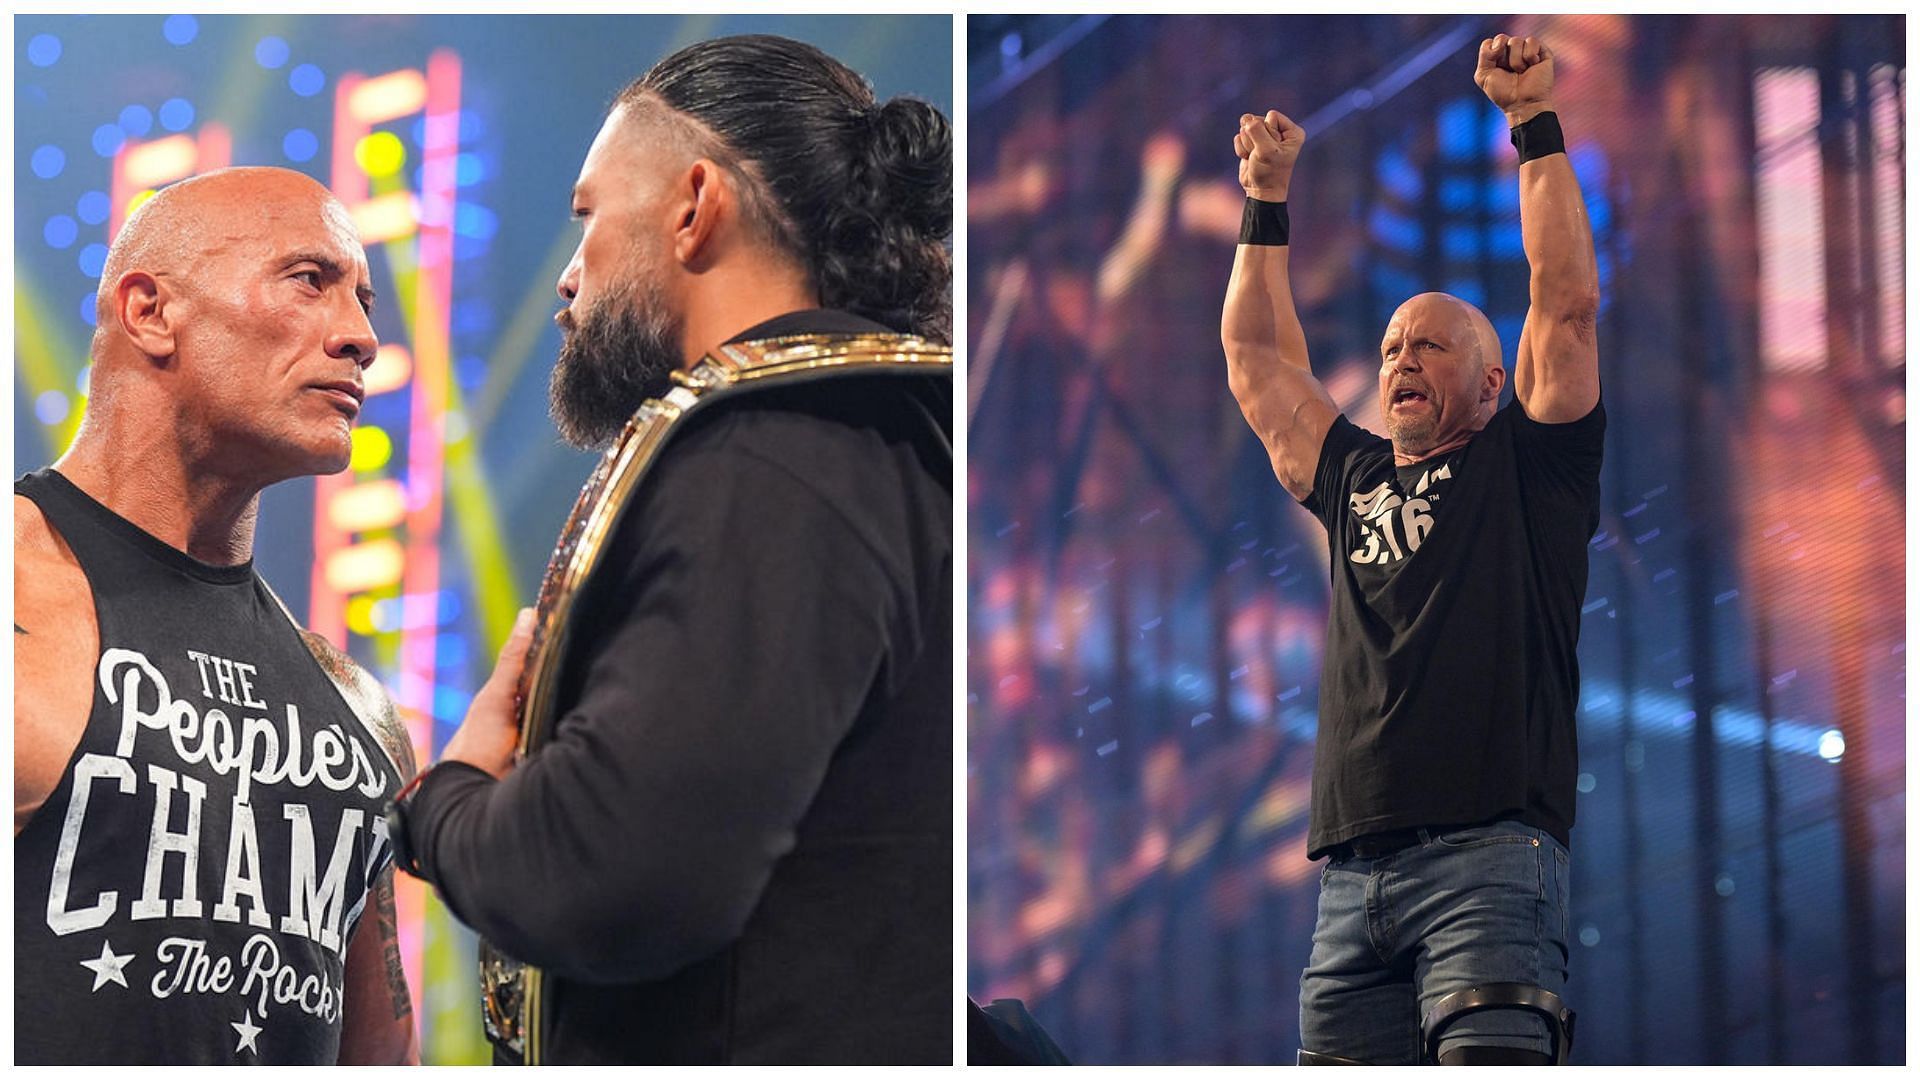 The Rock &amp; Roman Reigns (left) and Stone Cold Steve Austin (right).